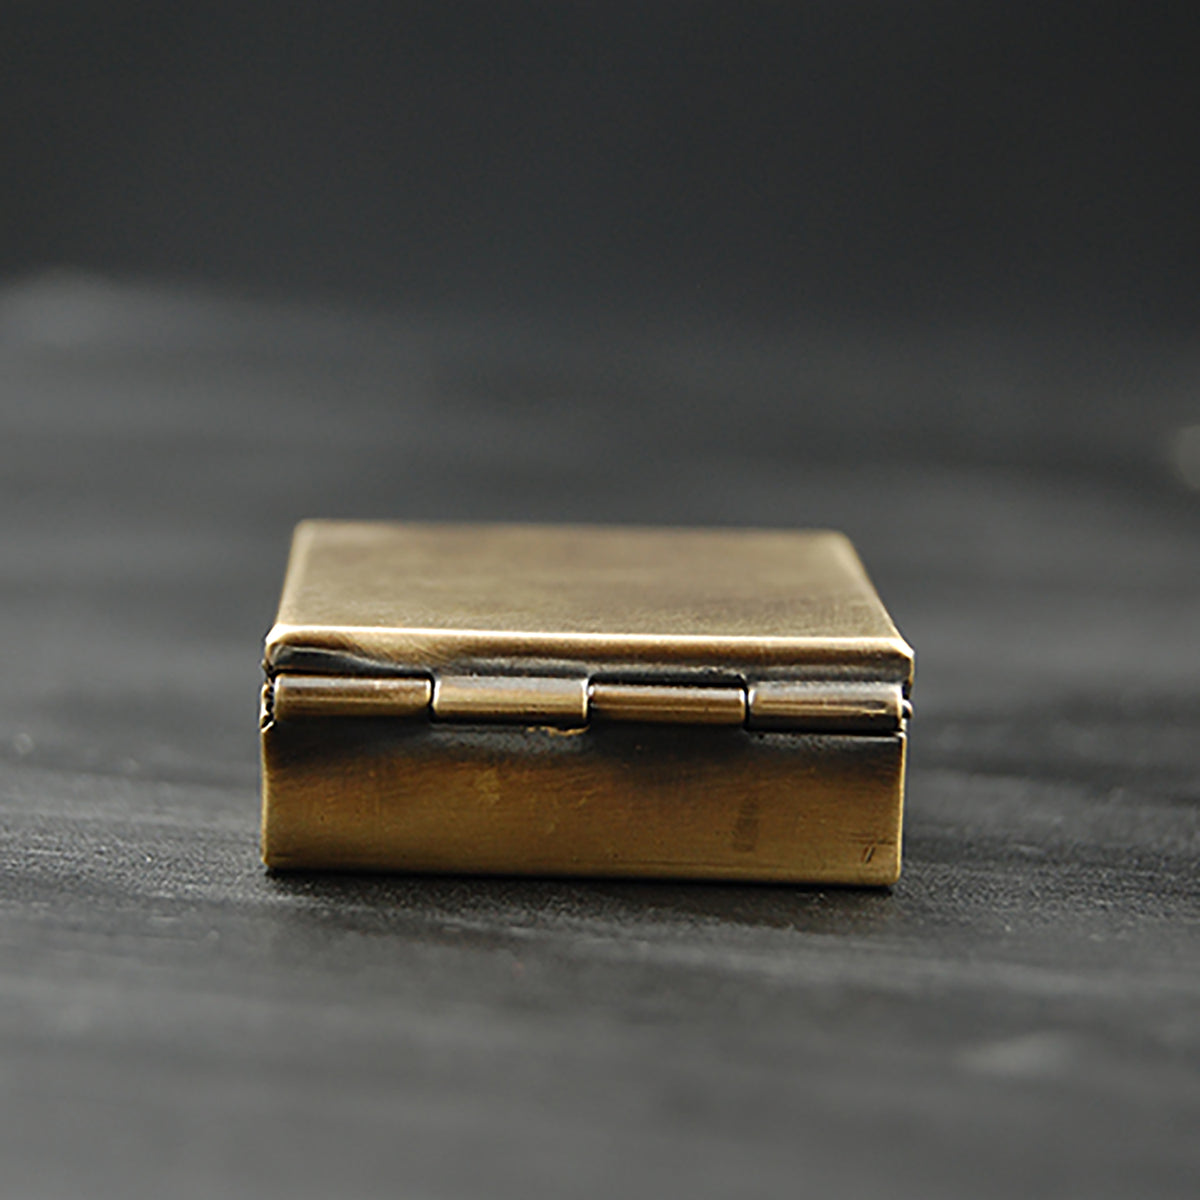 Customizable 1.5 Square Brass Pill or Trinket Box with Your